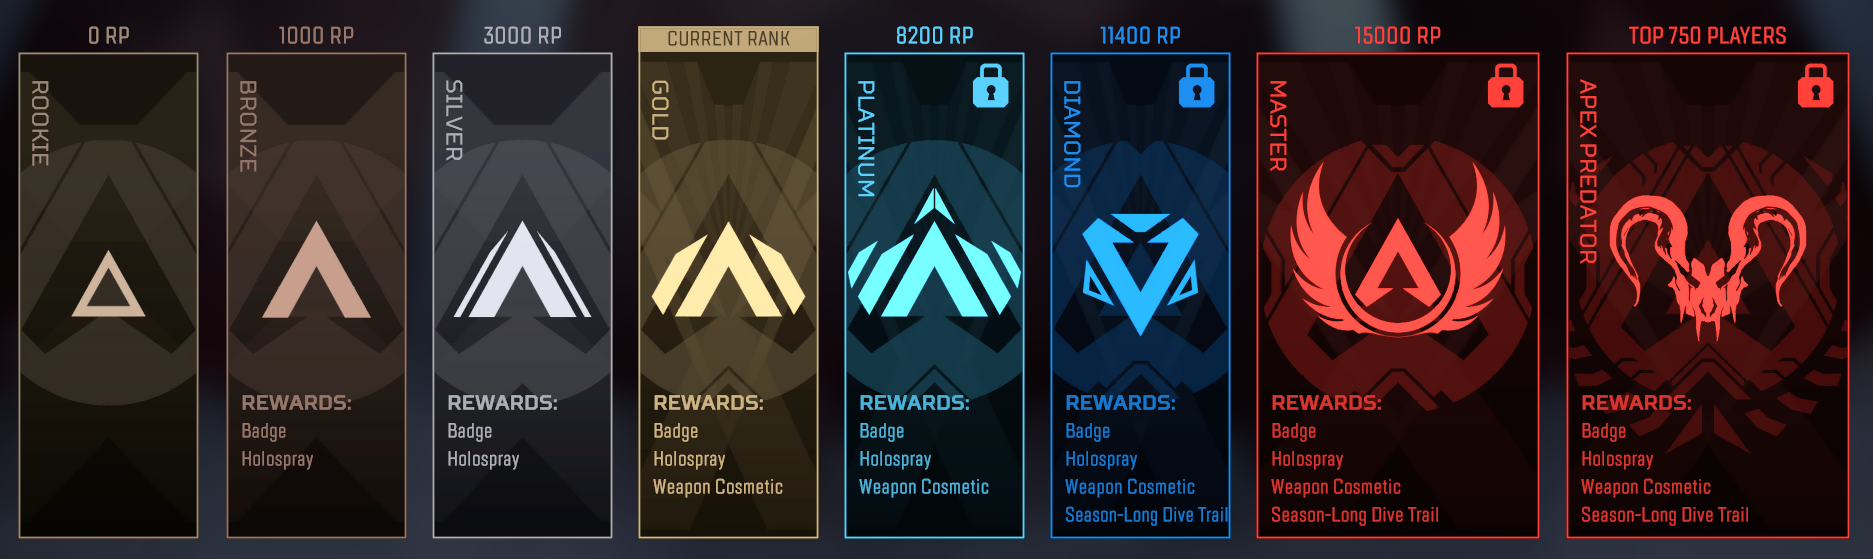 Ranked Leagues - Apex Legends Wiki